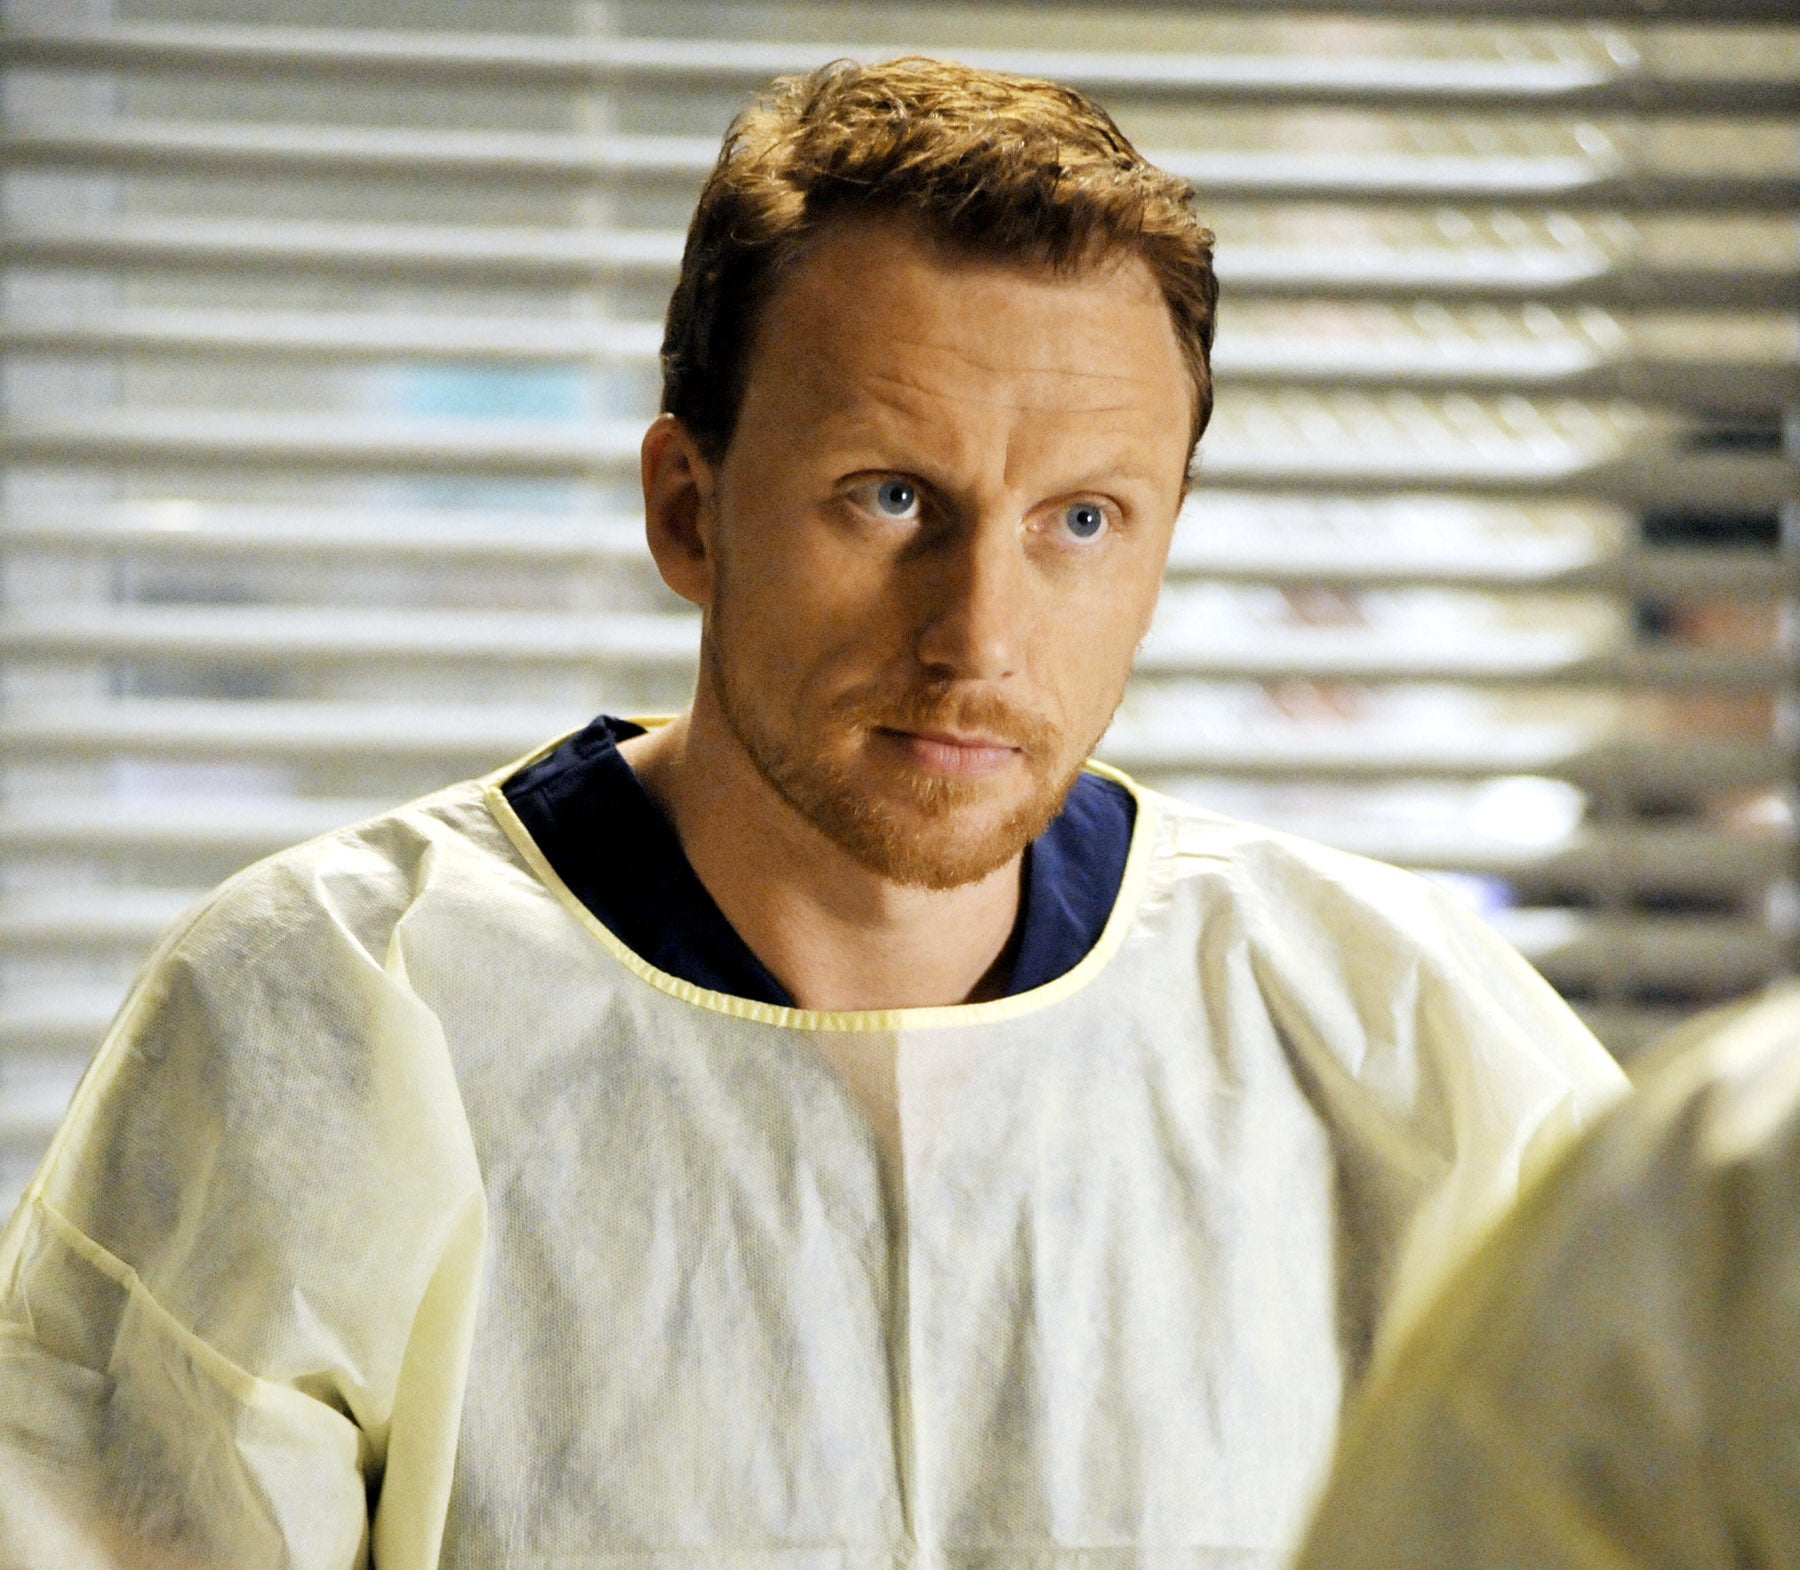 Owen Hunt from Grey&#x27;s Anatomy in scrubs, looking concerned in a hospital setting